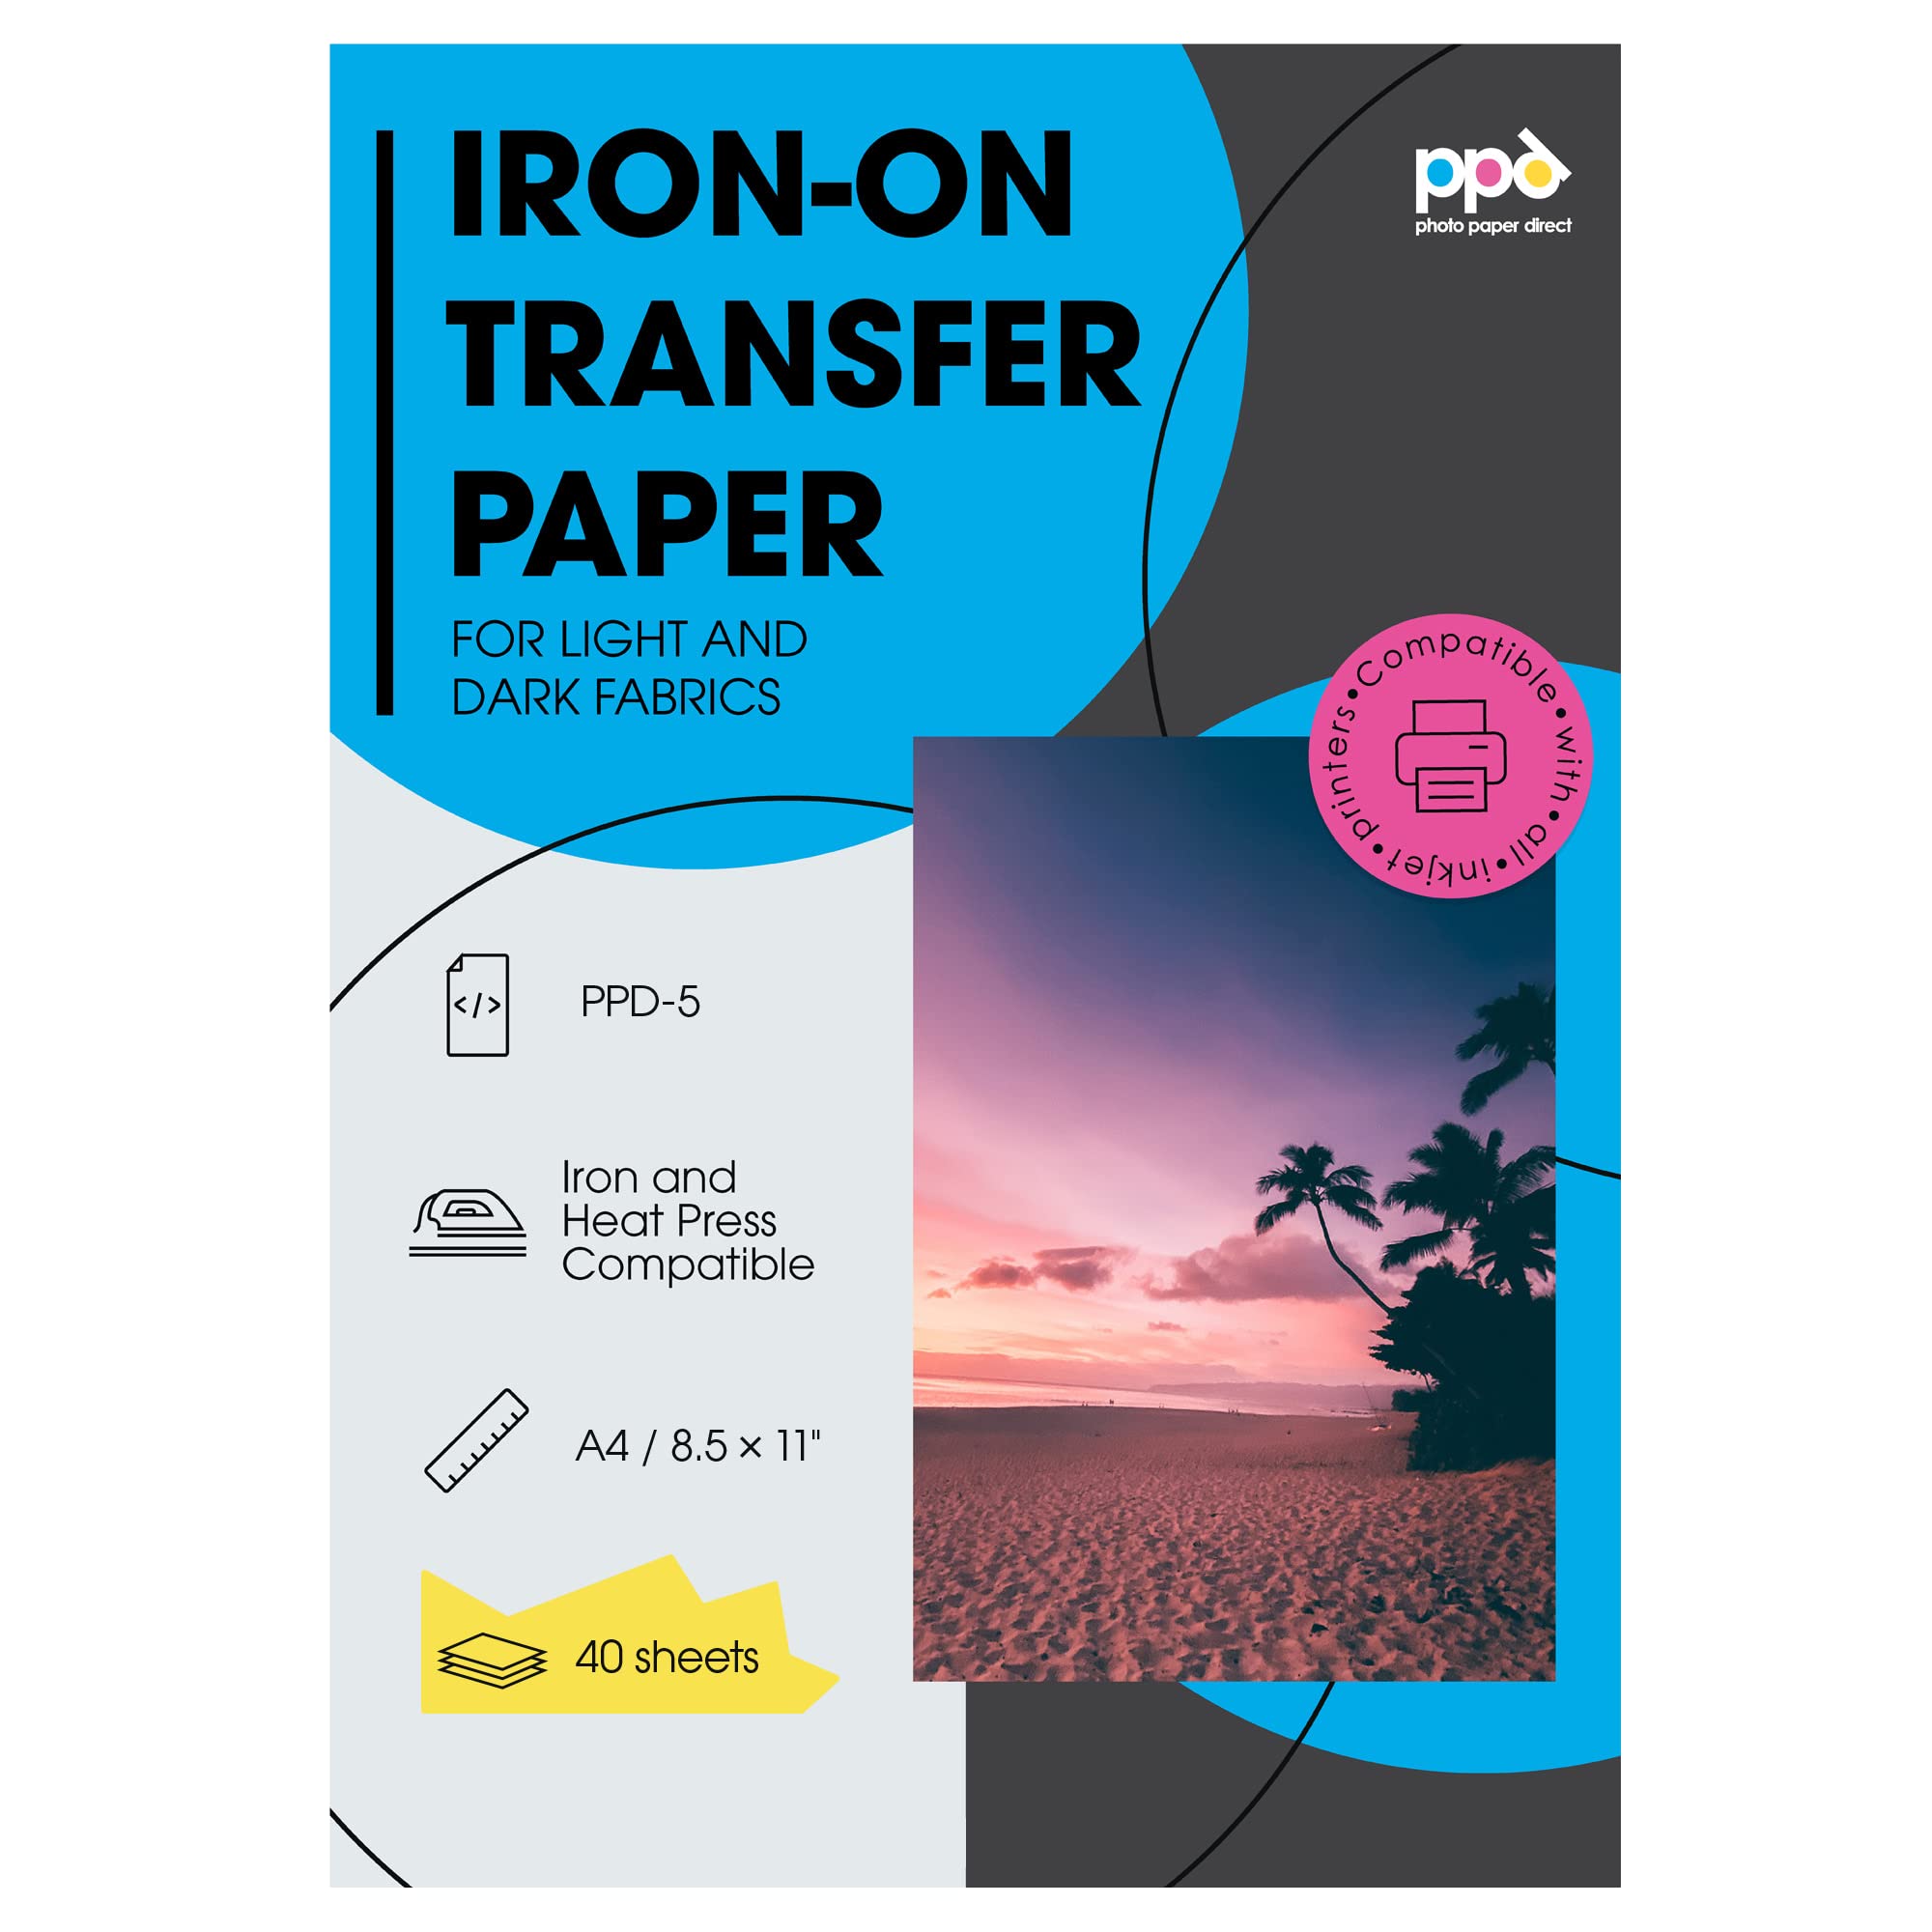 PPD Inkjet Iron-On Mixed Light and Dark Transfer Paper LTR 8.5X11